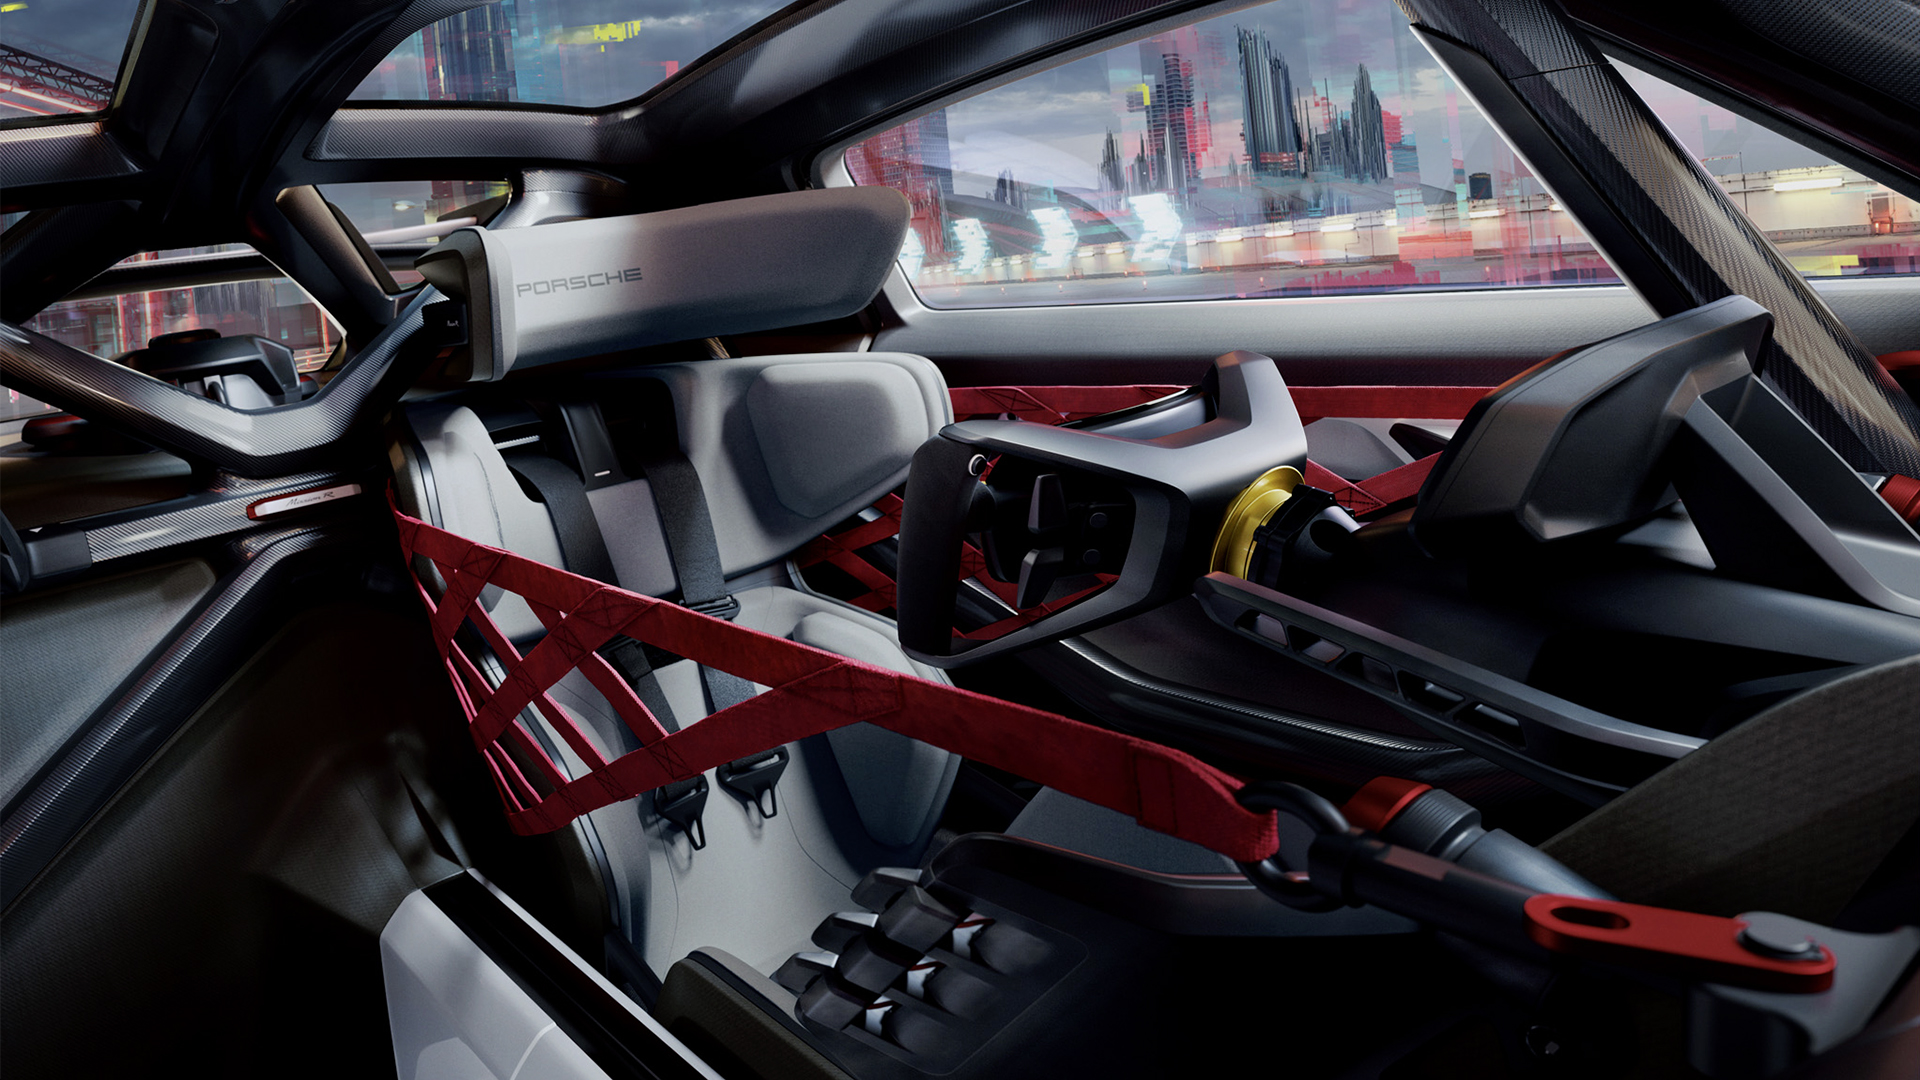 Interior view of cockpit of Mission R concept study racecar